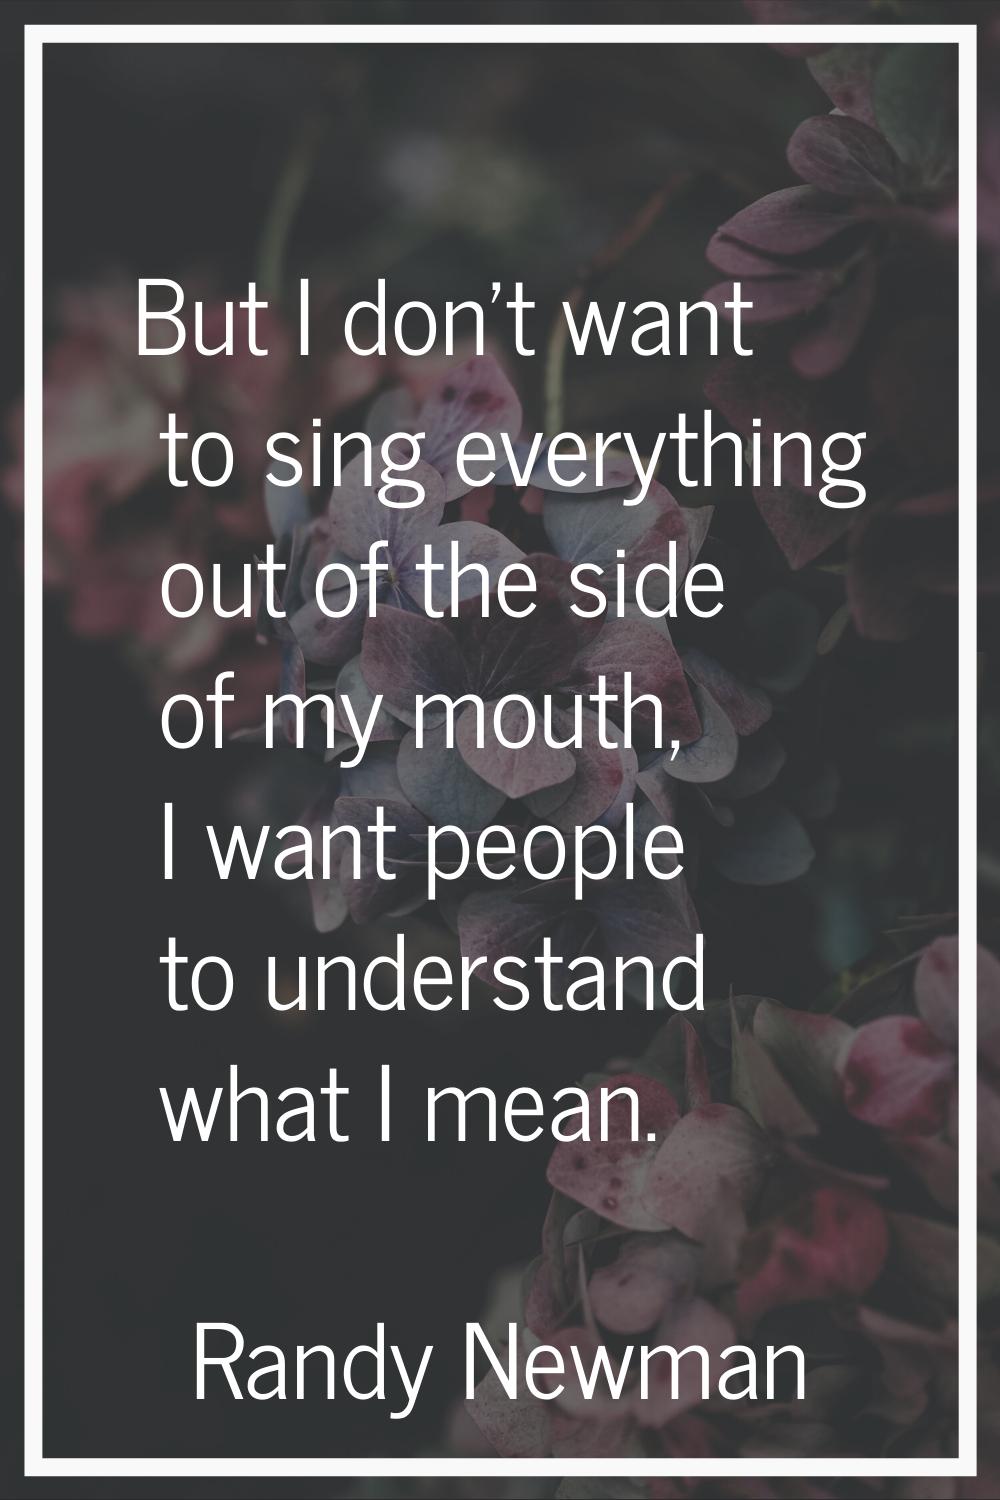 But I don't want to sing everything out of the side of my mouth, I want people to understand what I